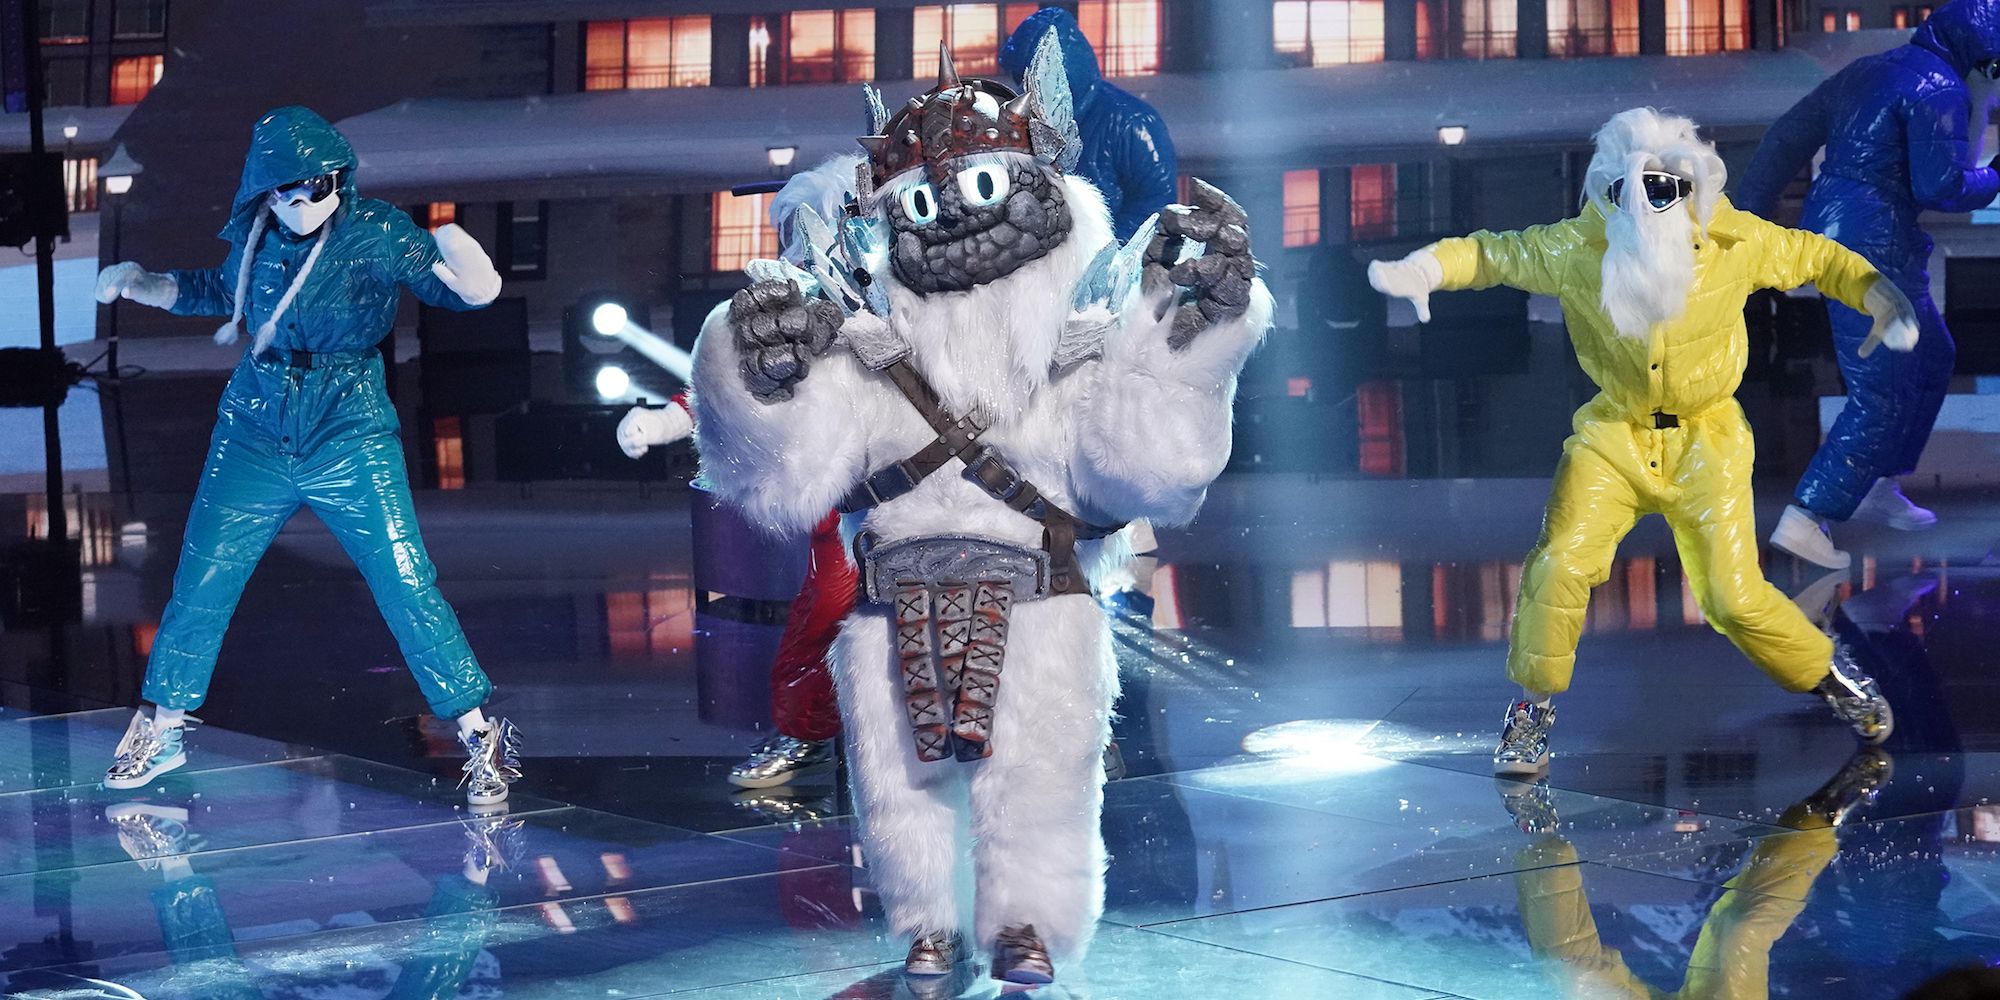 Yeti performing a song on The Masked Singer